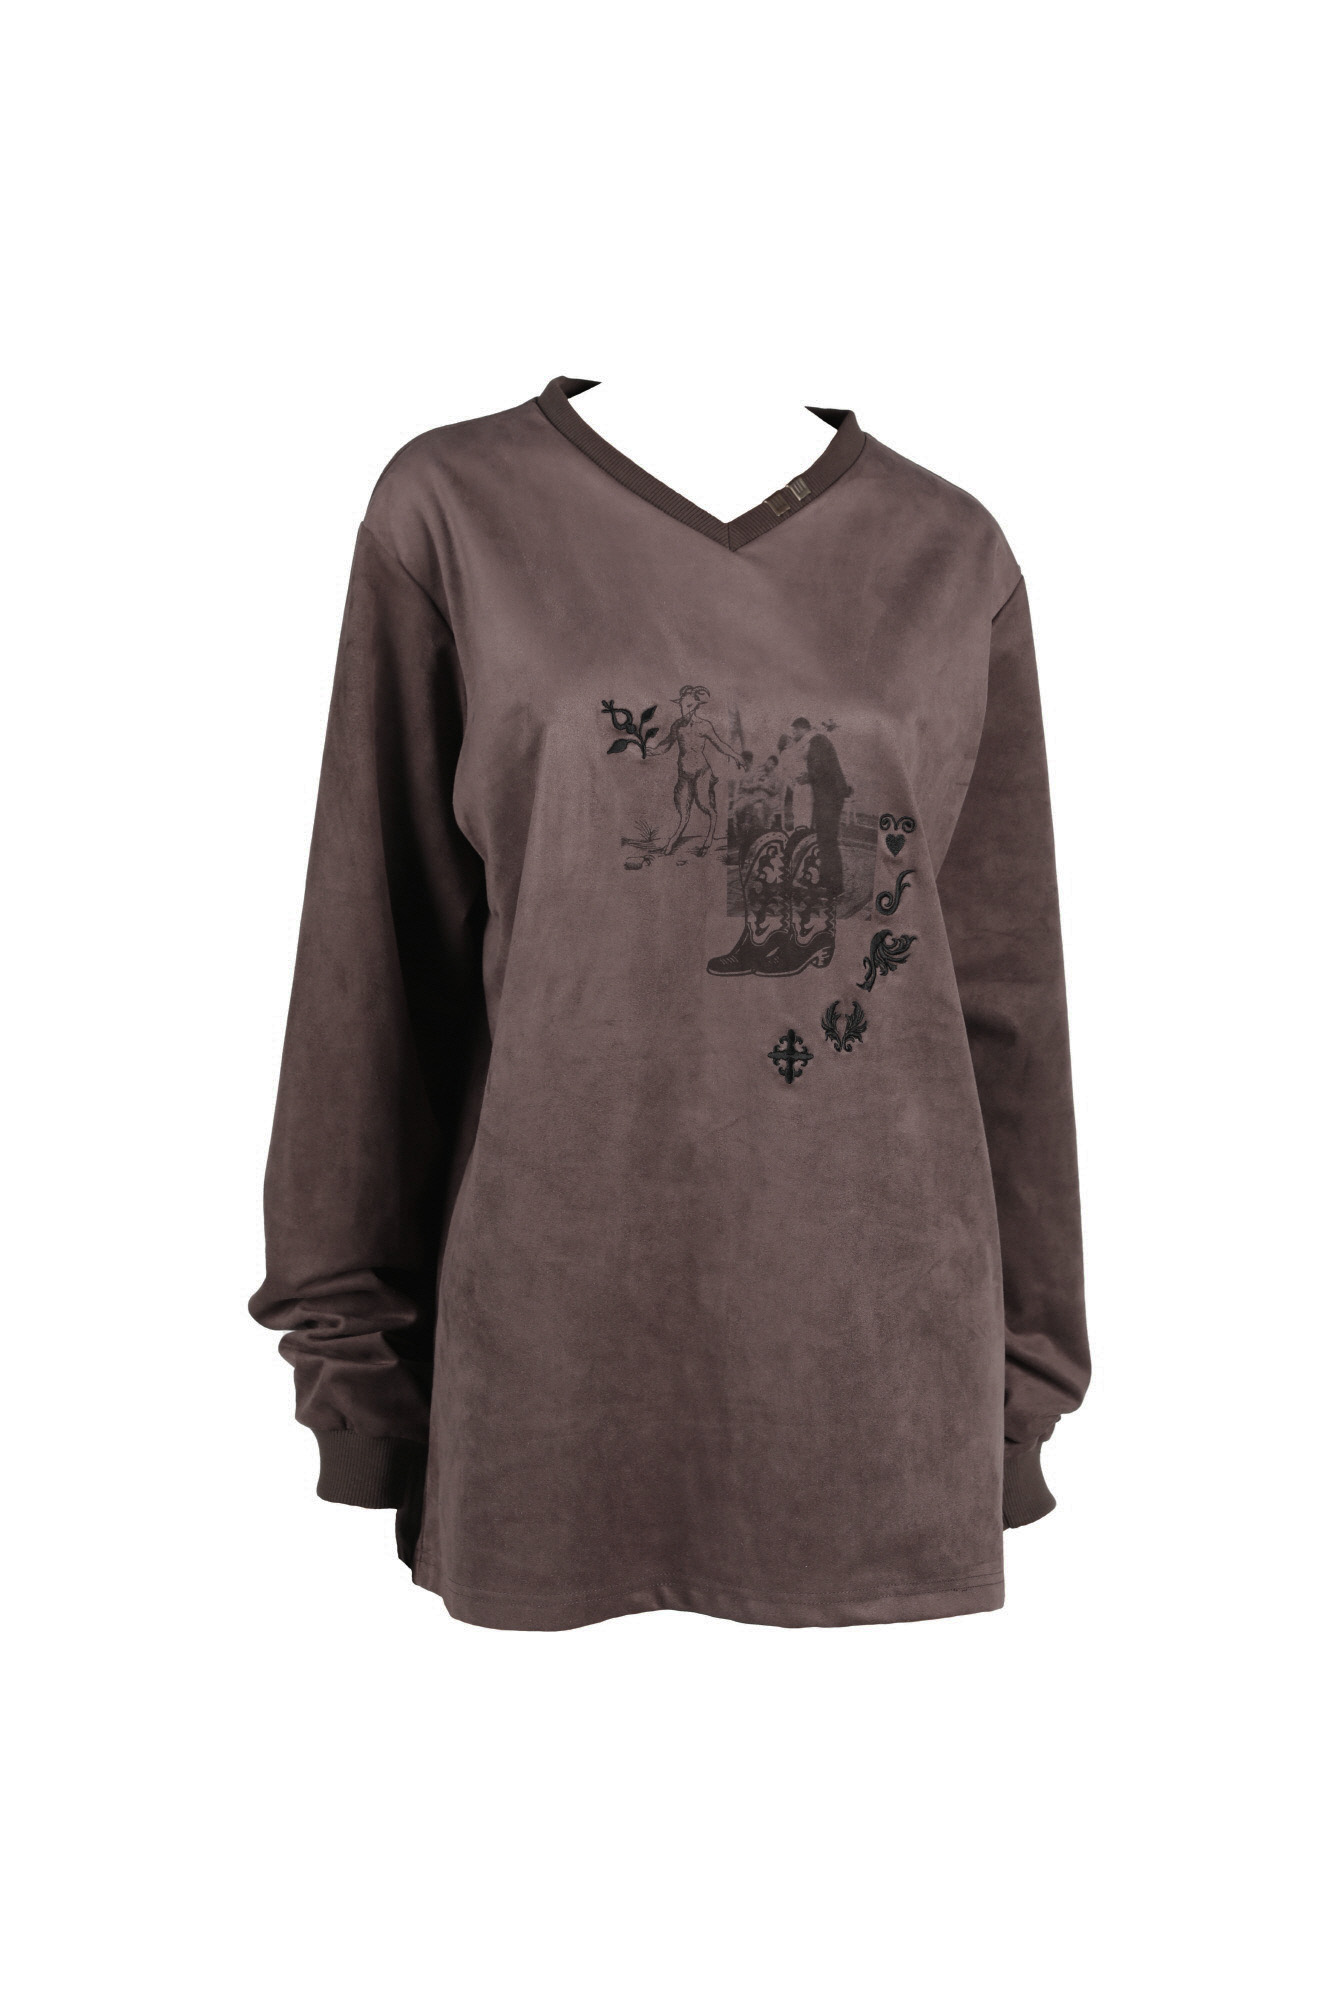 Old memory suede T shirts (BROWN)